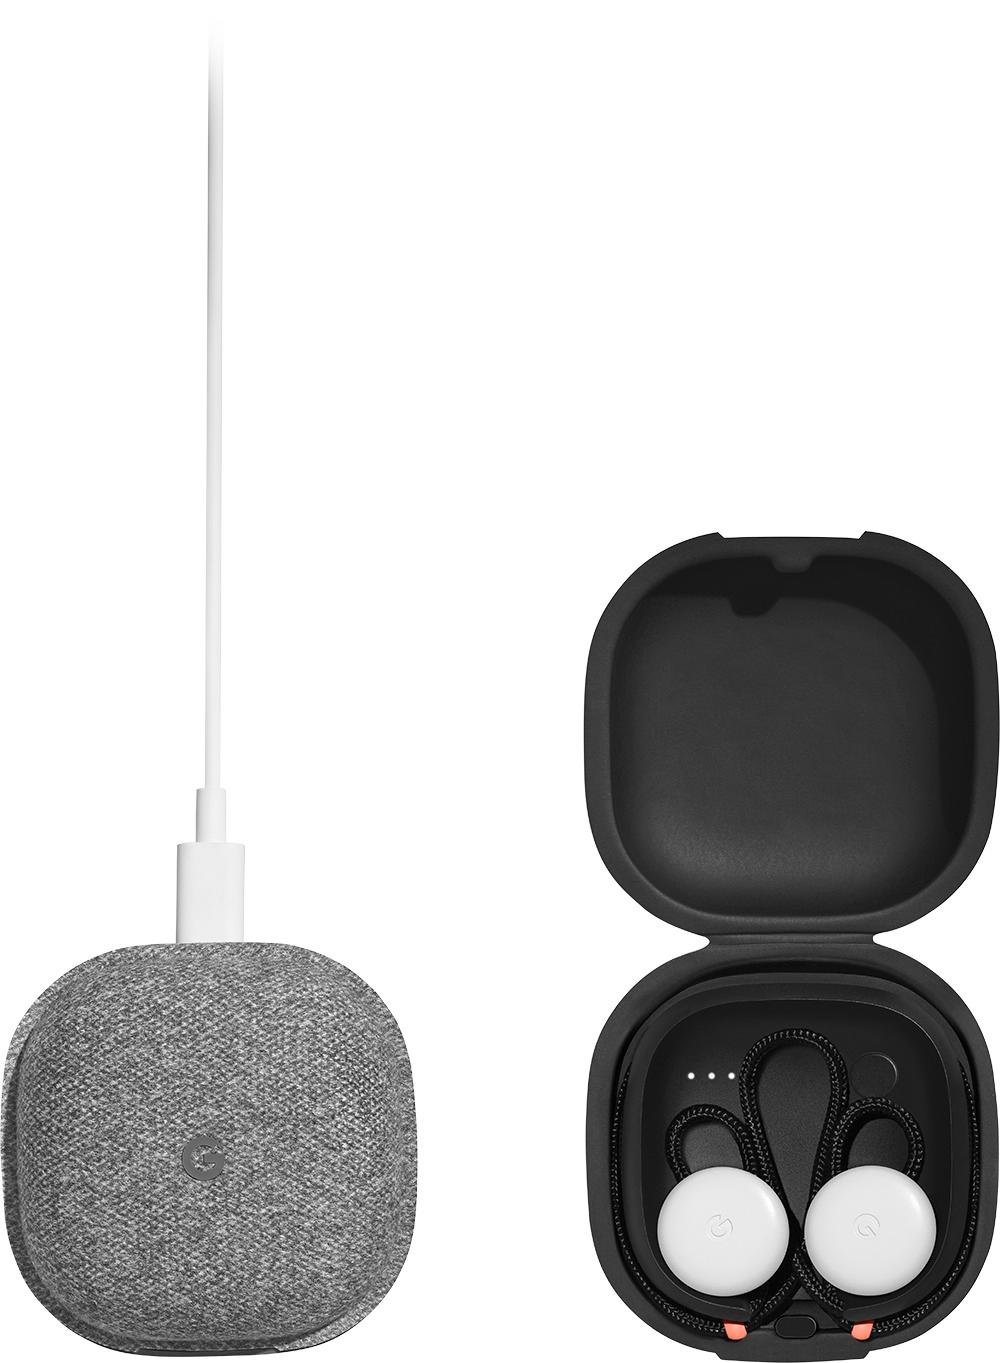 Google Pixel Buds A Series True wireless earphones with mic in ear  Bluetooth noise isolating clearly white - Office Depot